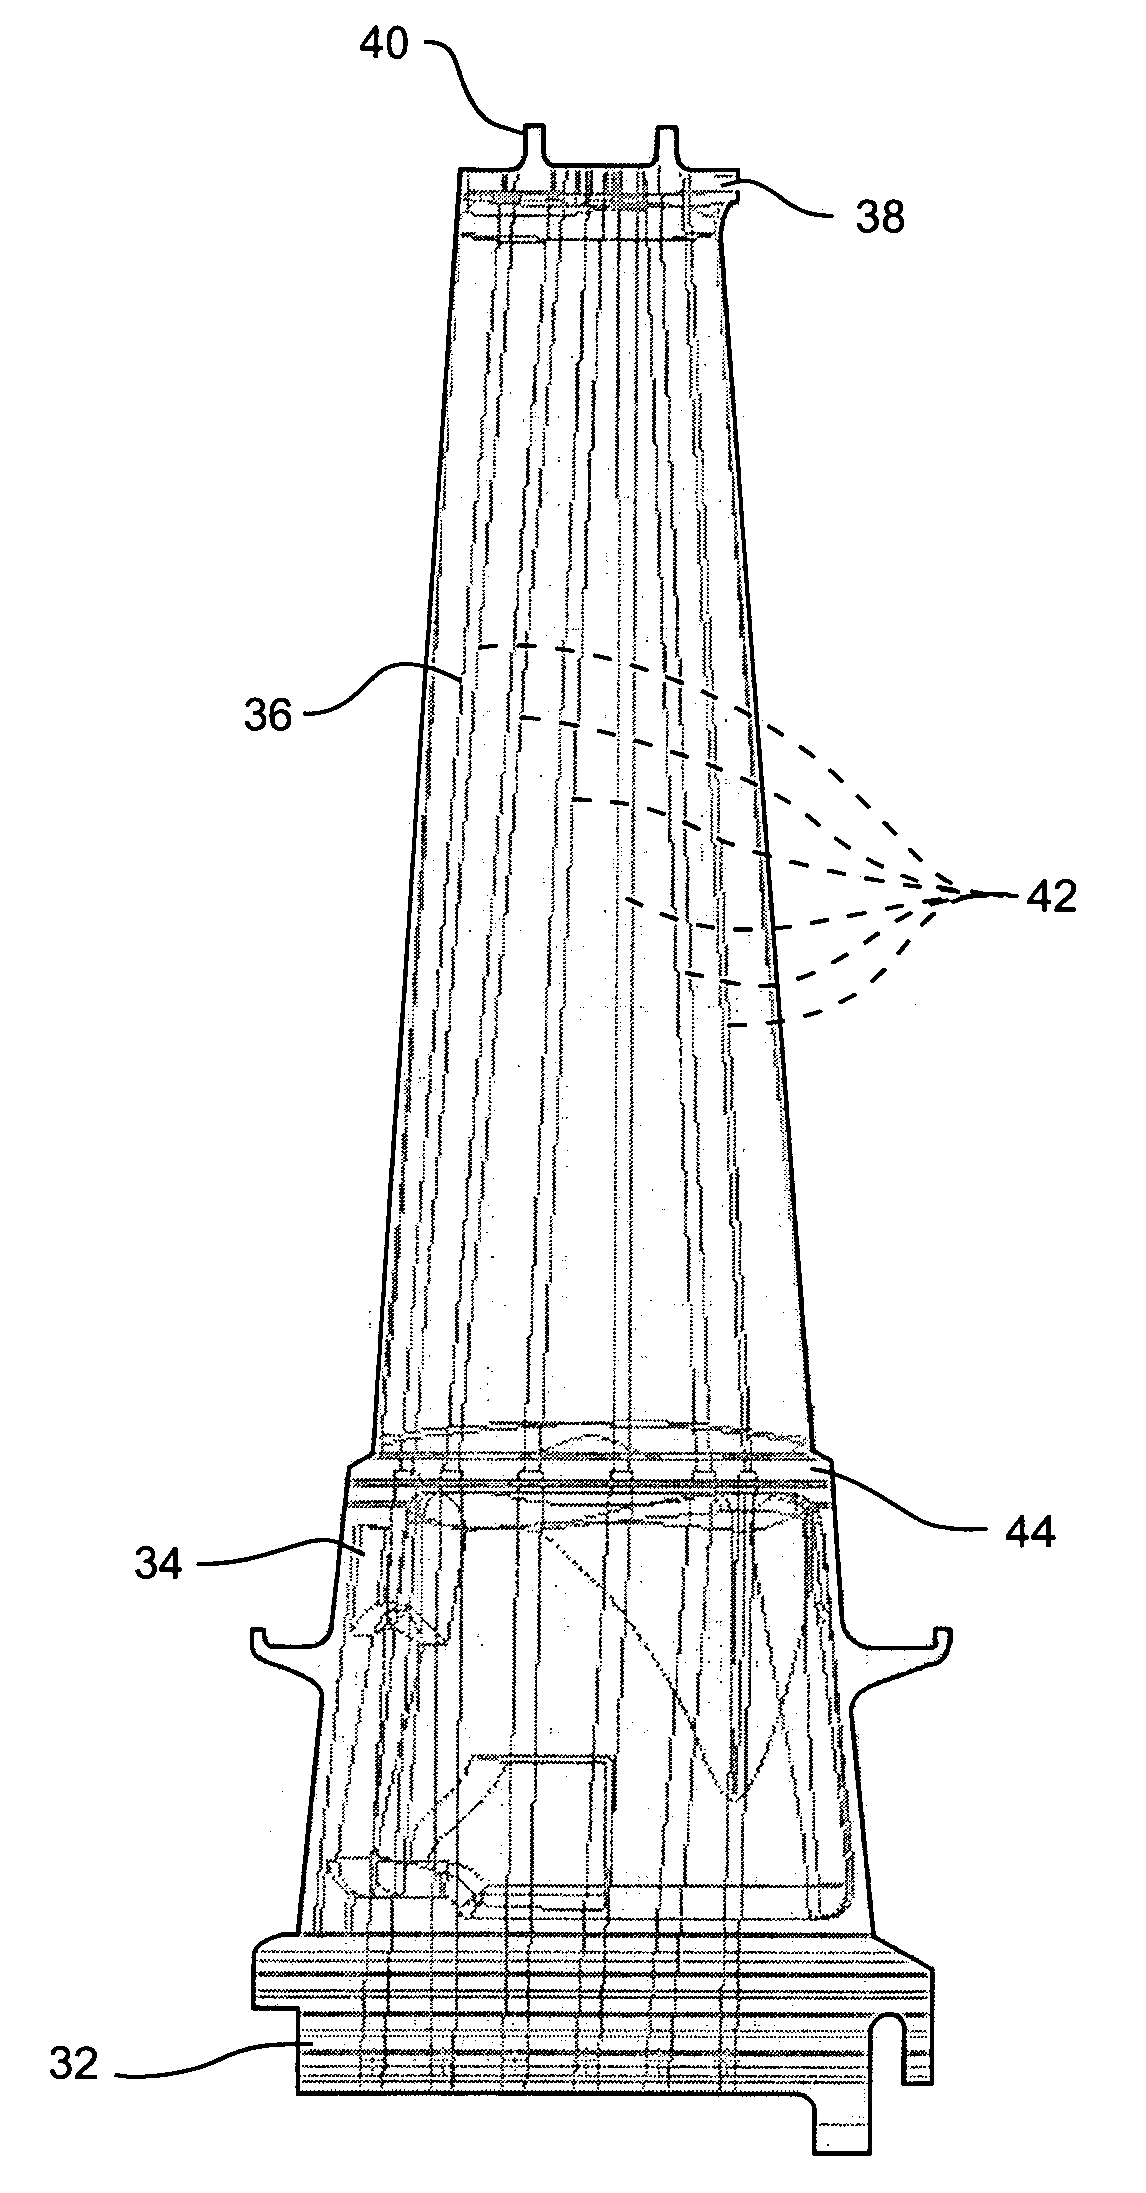 Turbine bucket with optimized cooling circuit